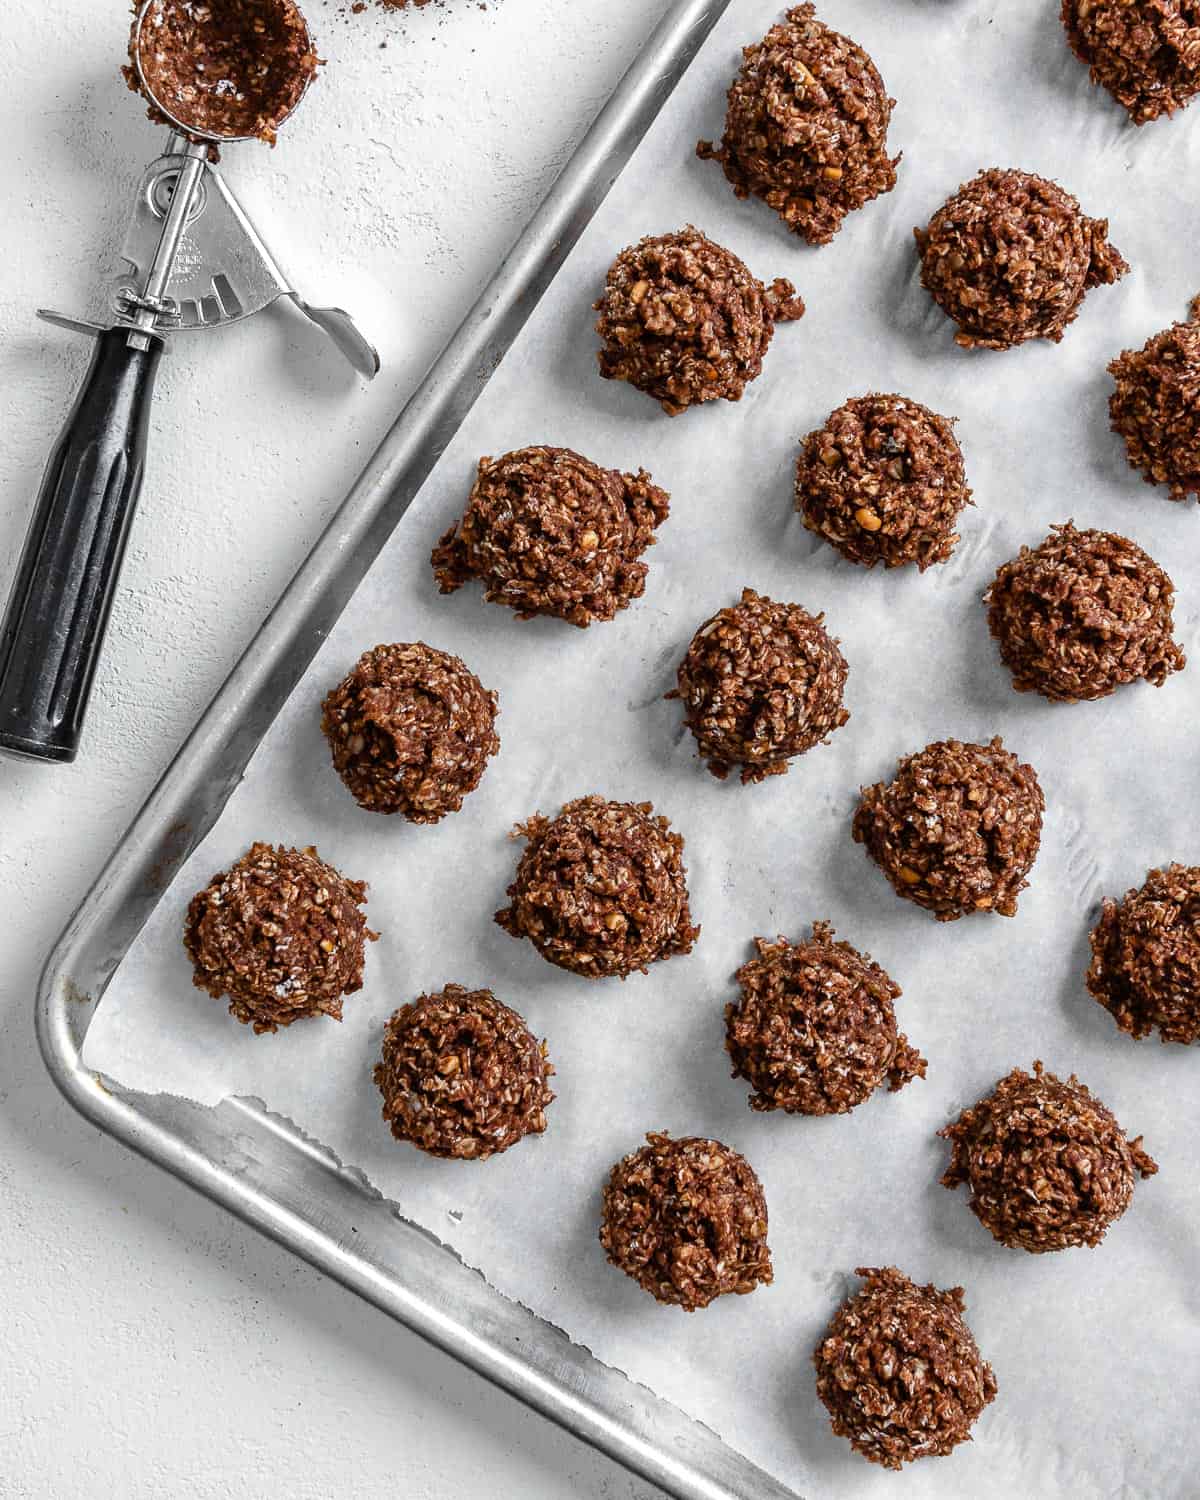 completed Vegan No Bake Chocolate Cookies on a baking sheet